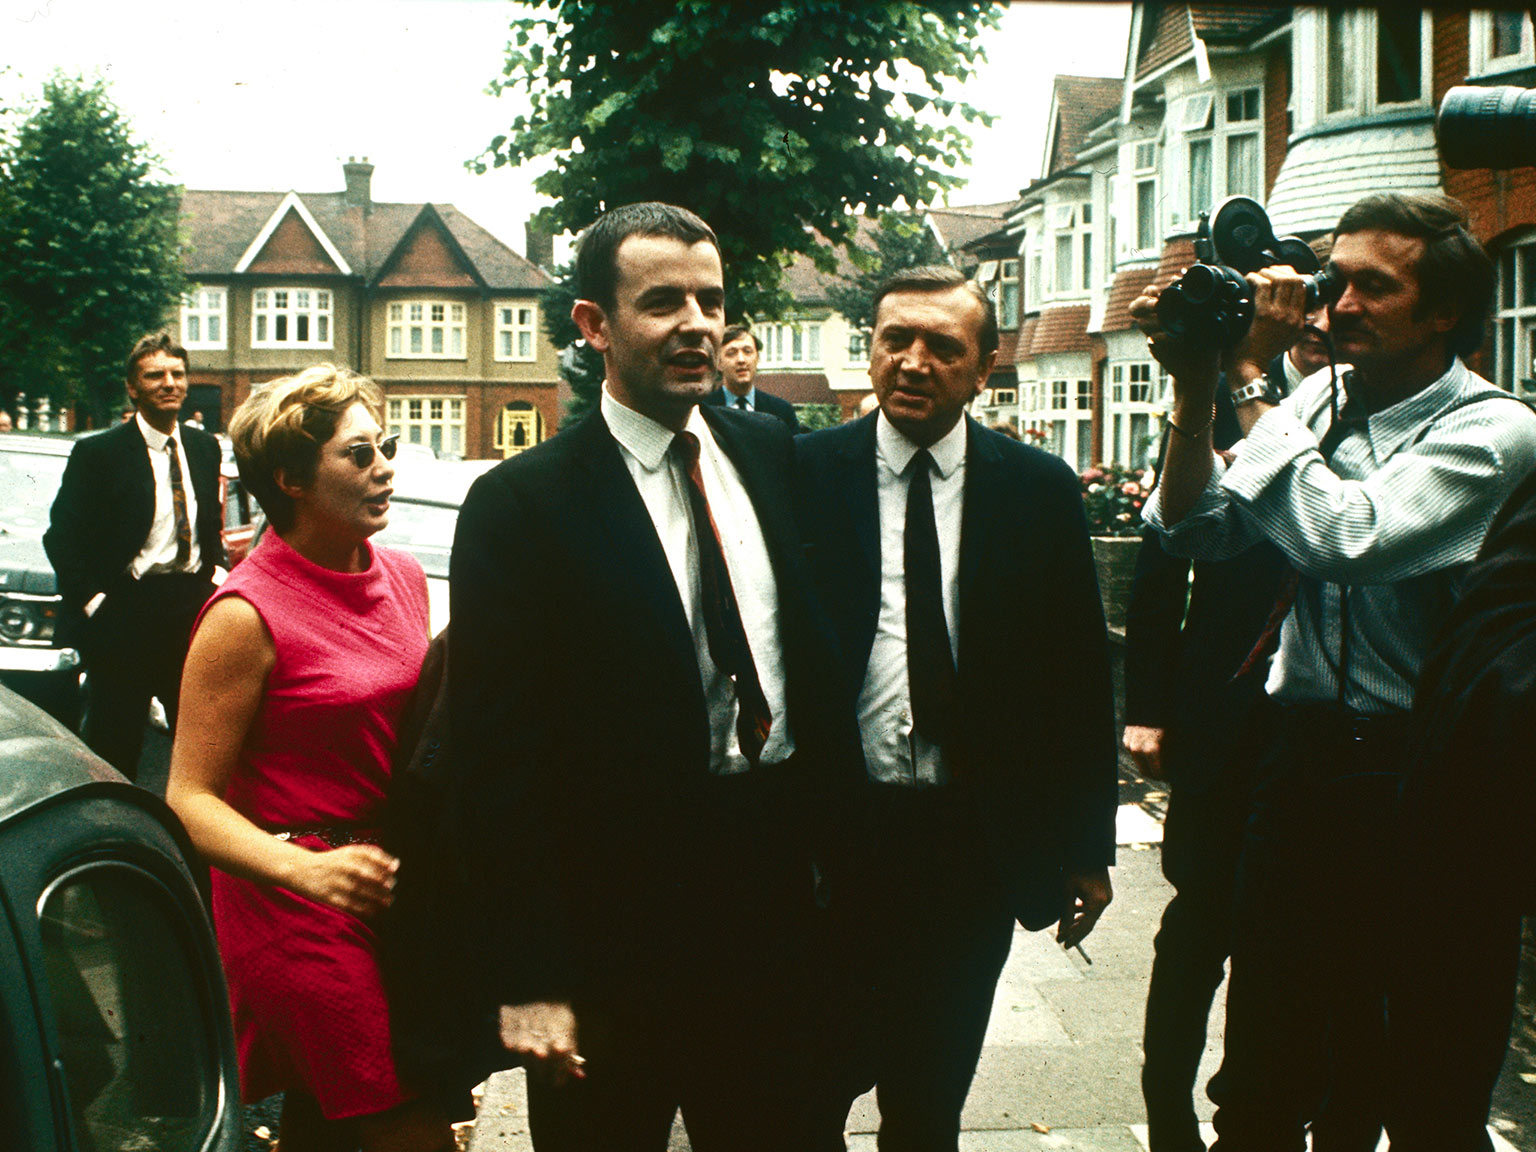 Brooke, with his wife, arrives home in North London, 24 July 1969